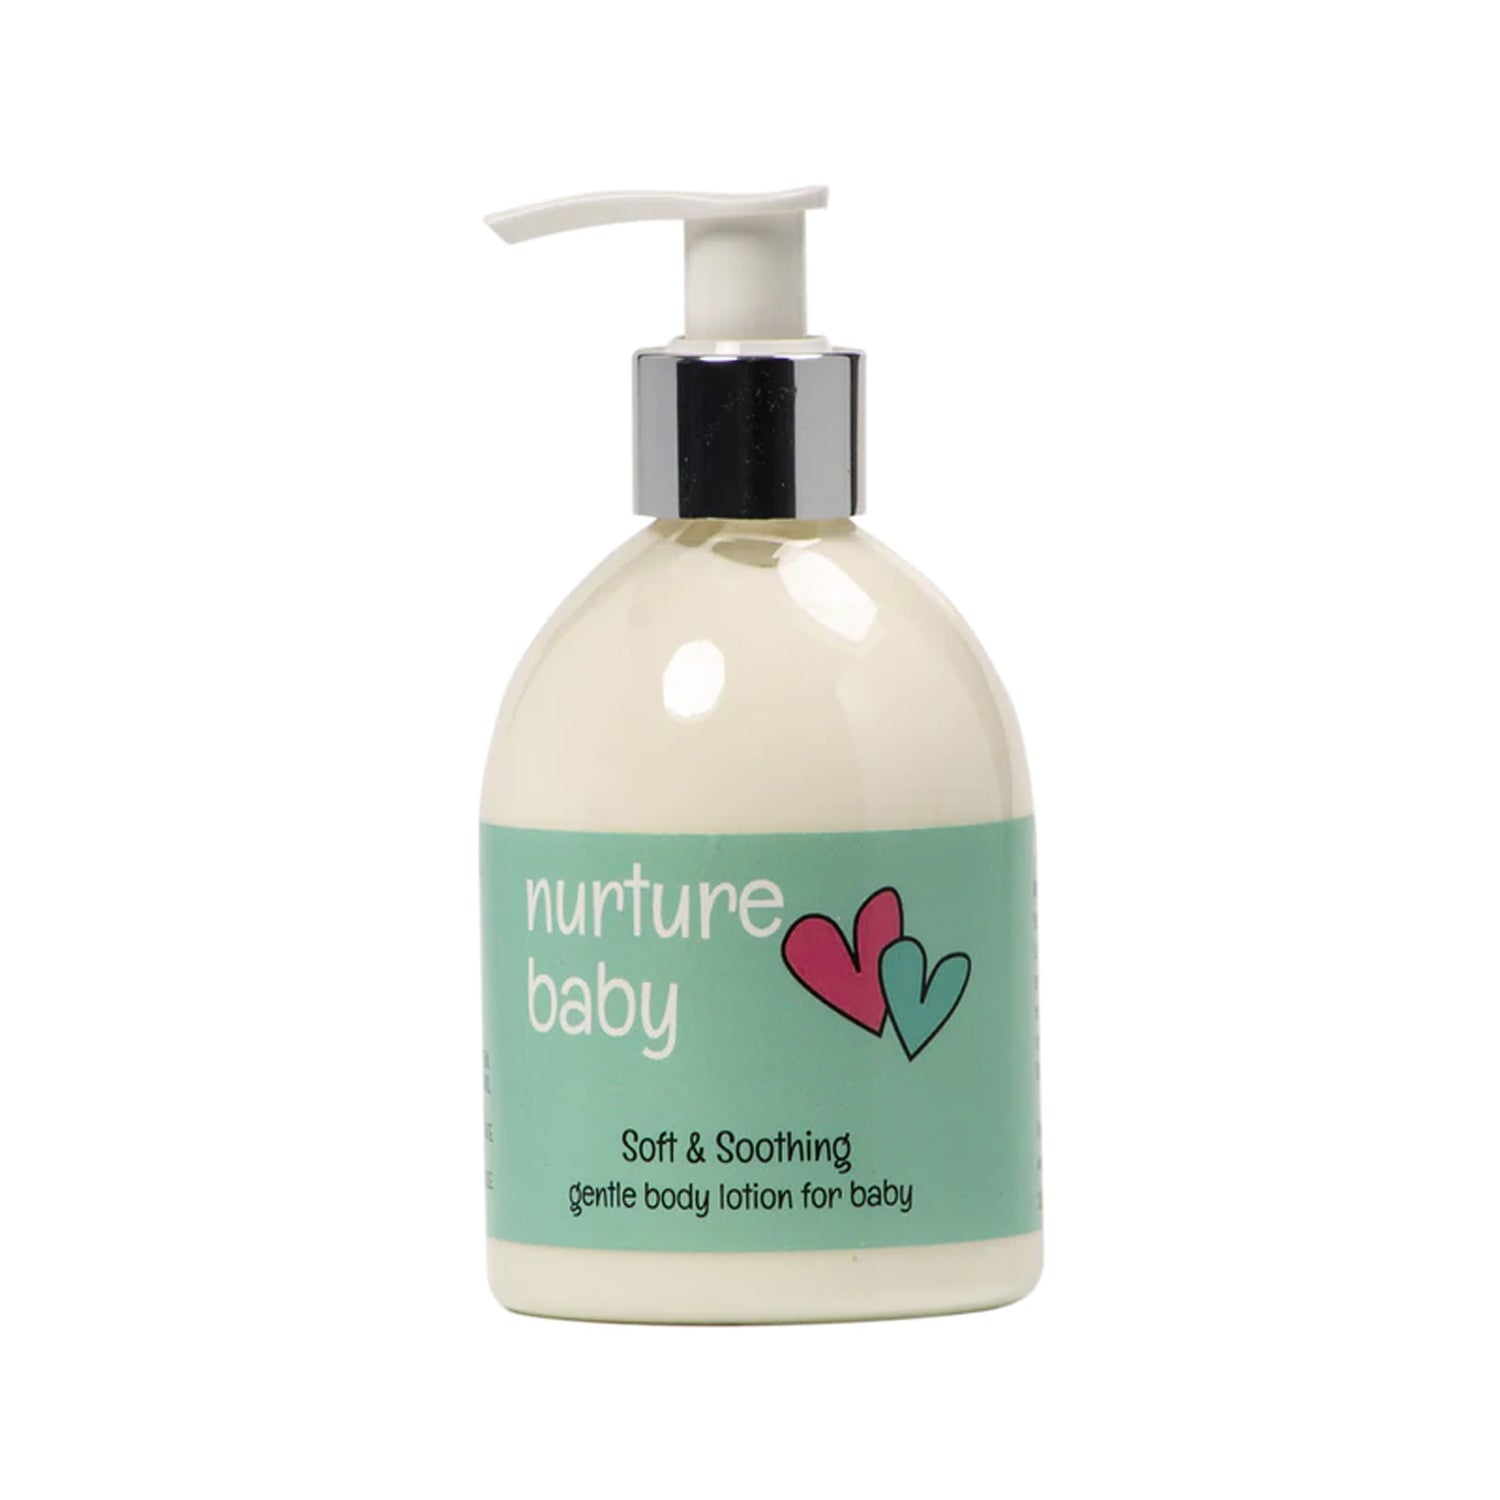 Soft & Soothing Body Lotion